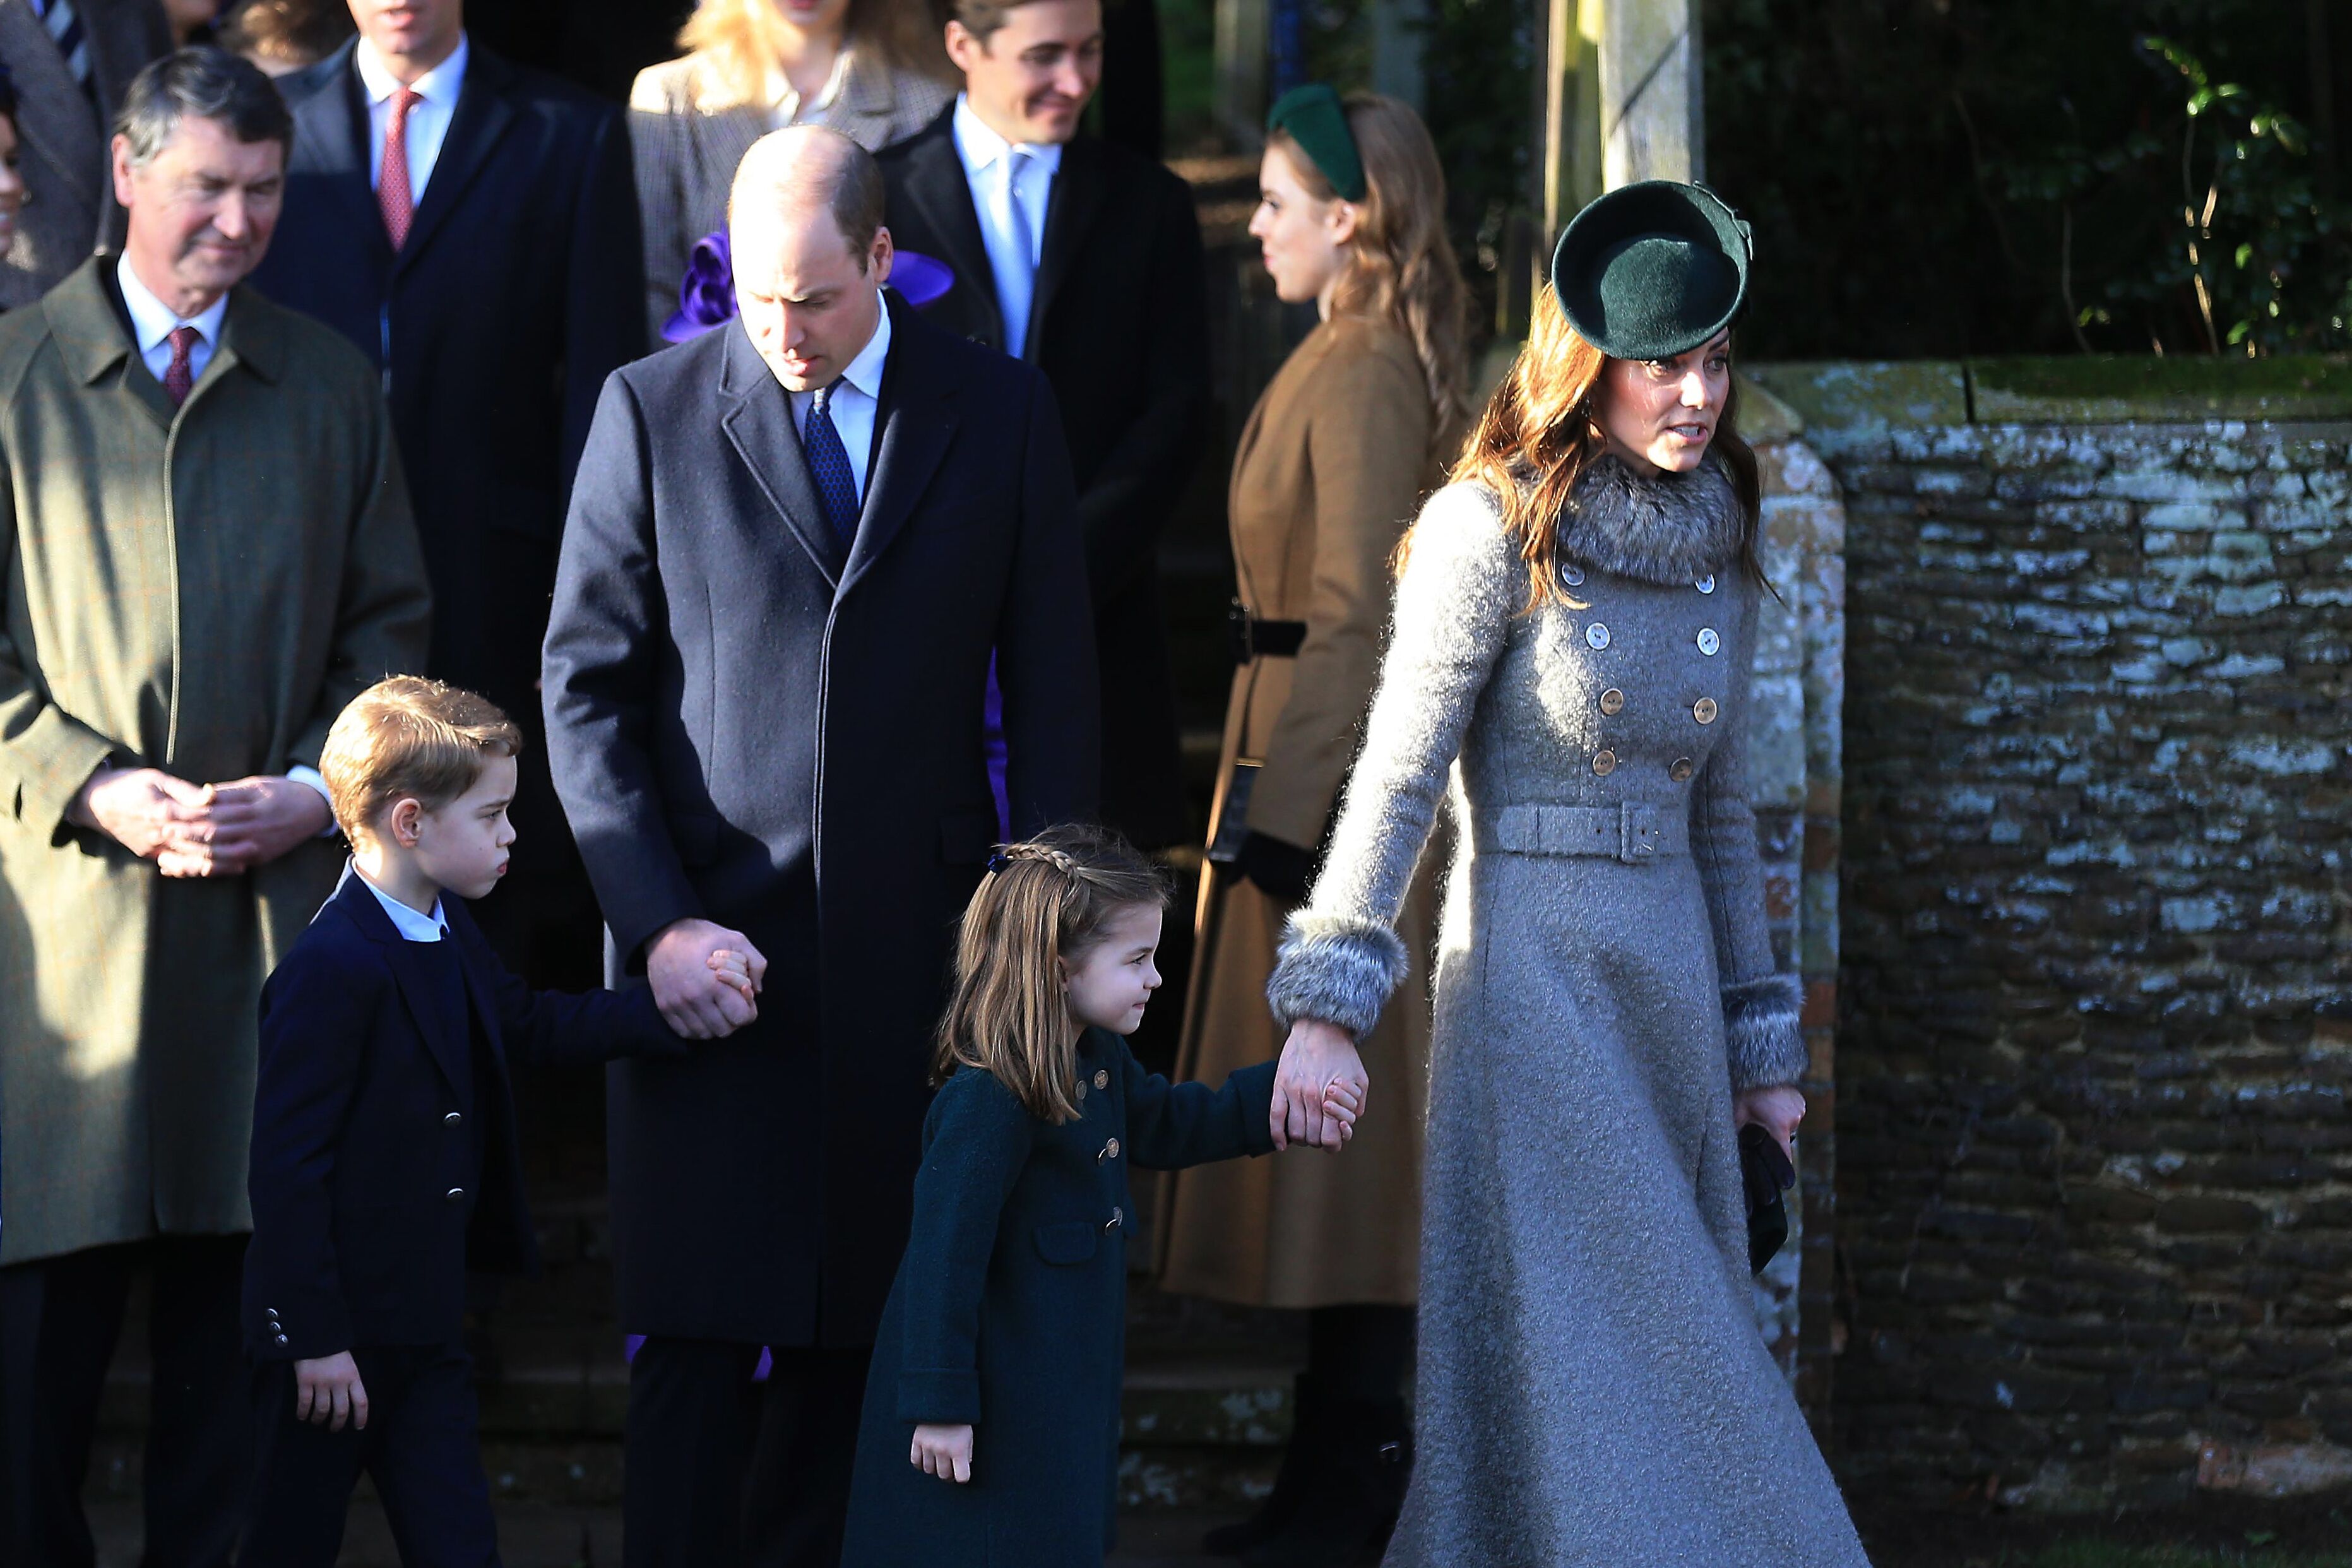 Prince William, Duke of Cambridge, Prince George, Princess Charlotte and Catherine, Duchess of Cambridge attend the Christmas Day Church service at Church of St Mary Magdalene on the Sandringham estate in King's Lynn, United Kingdom | Photo: Getty Images